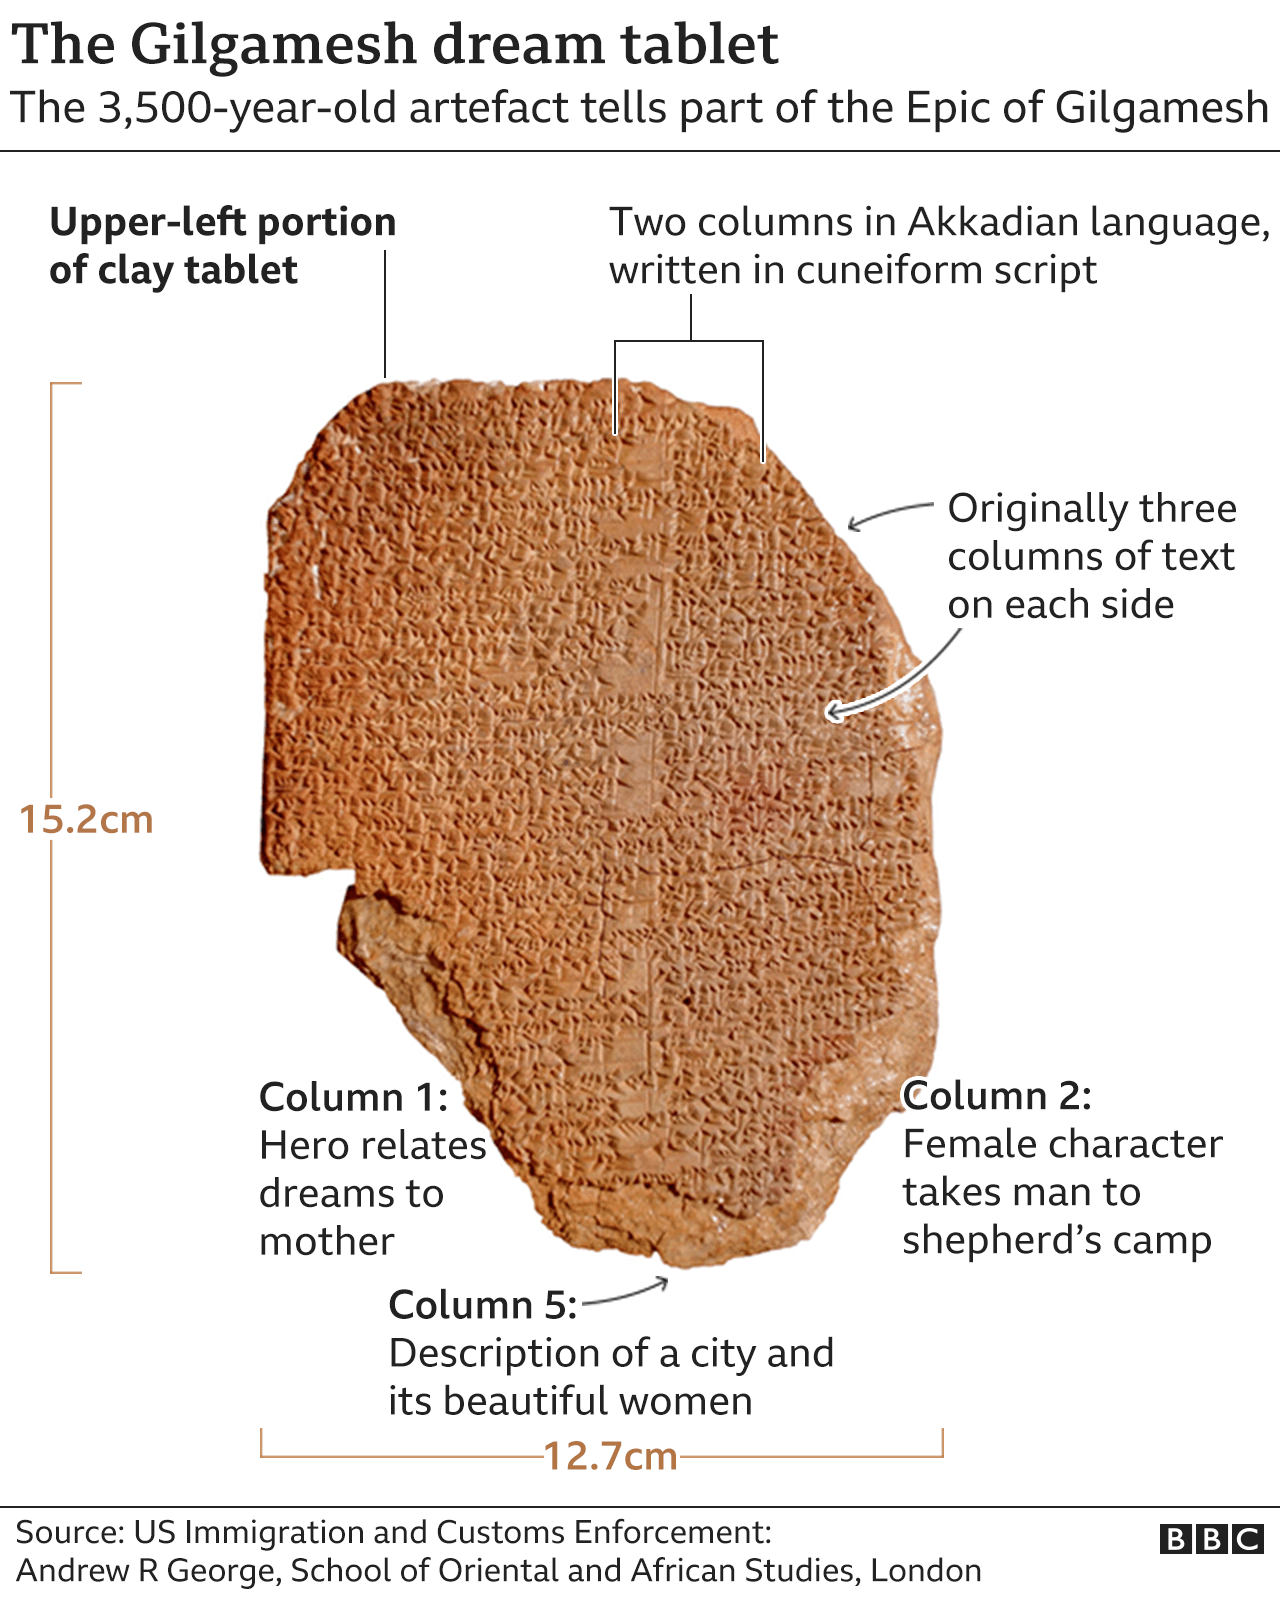 Graphic showing the location of the columns of text on the clay tablet